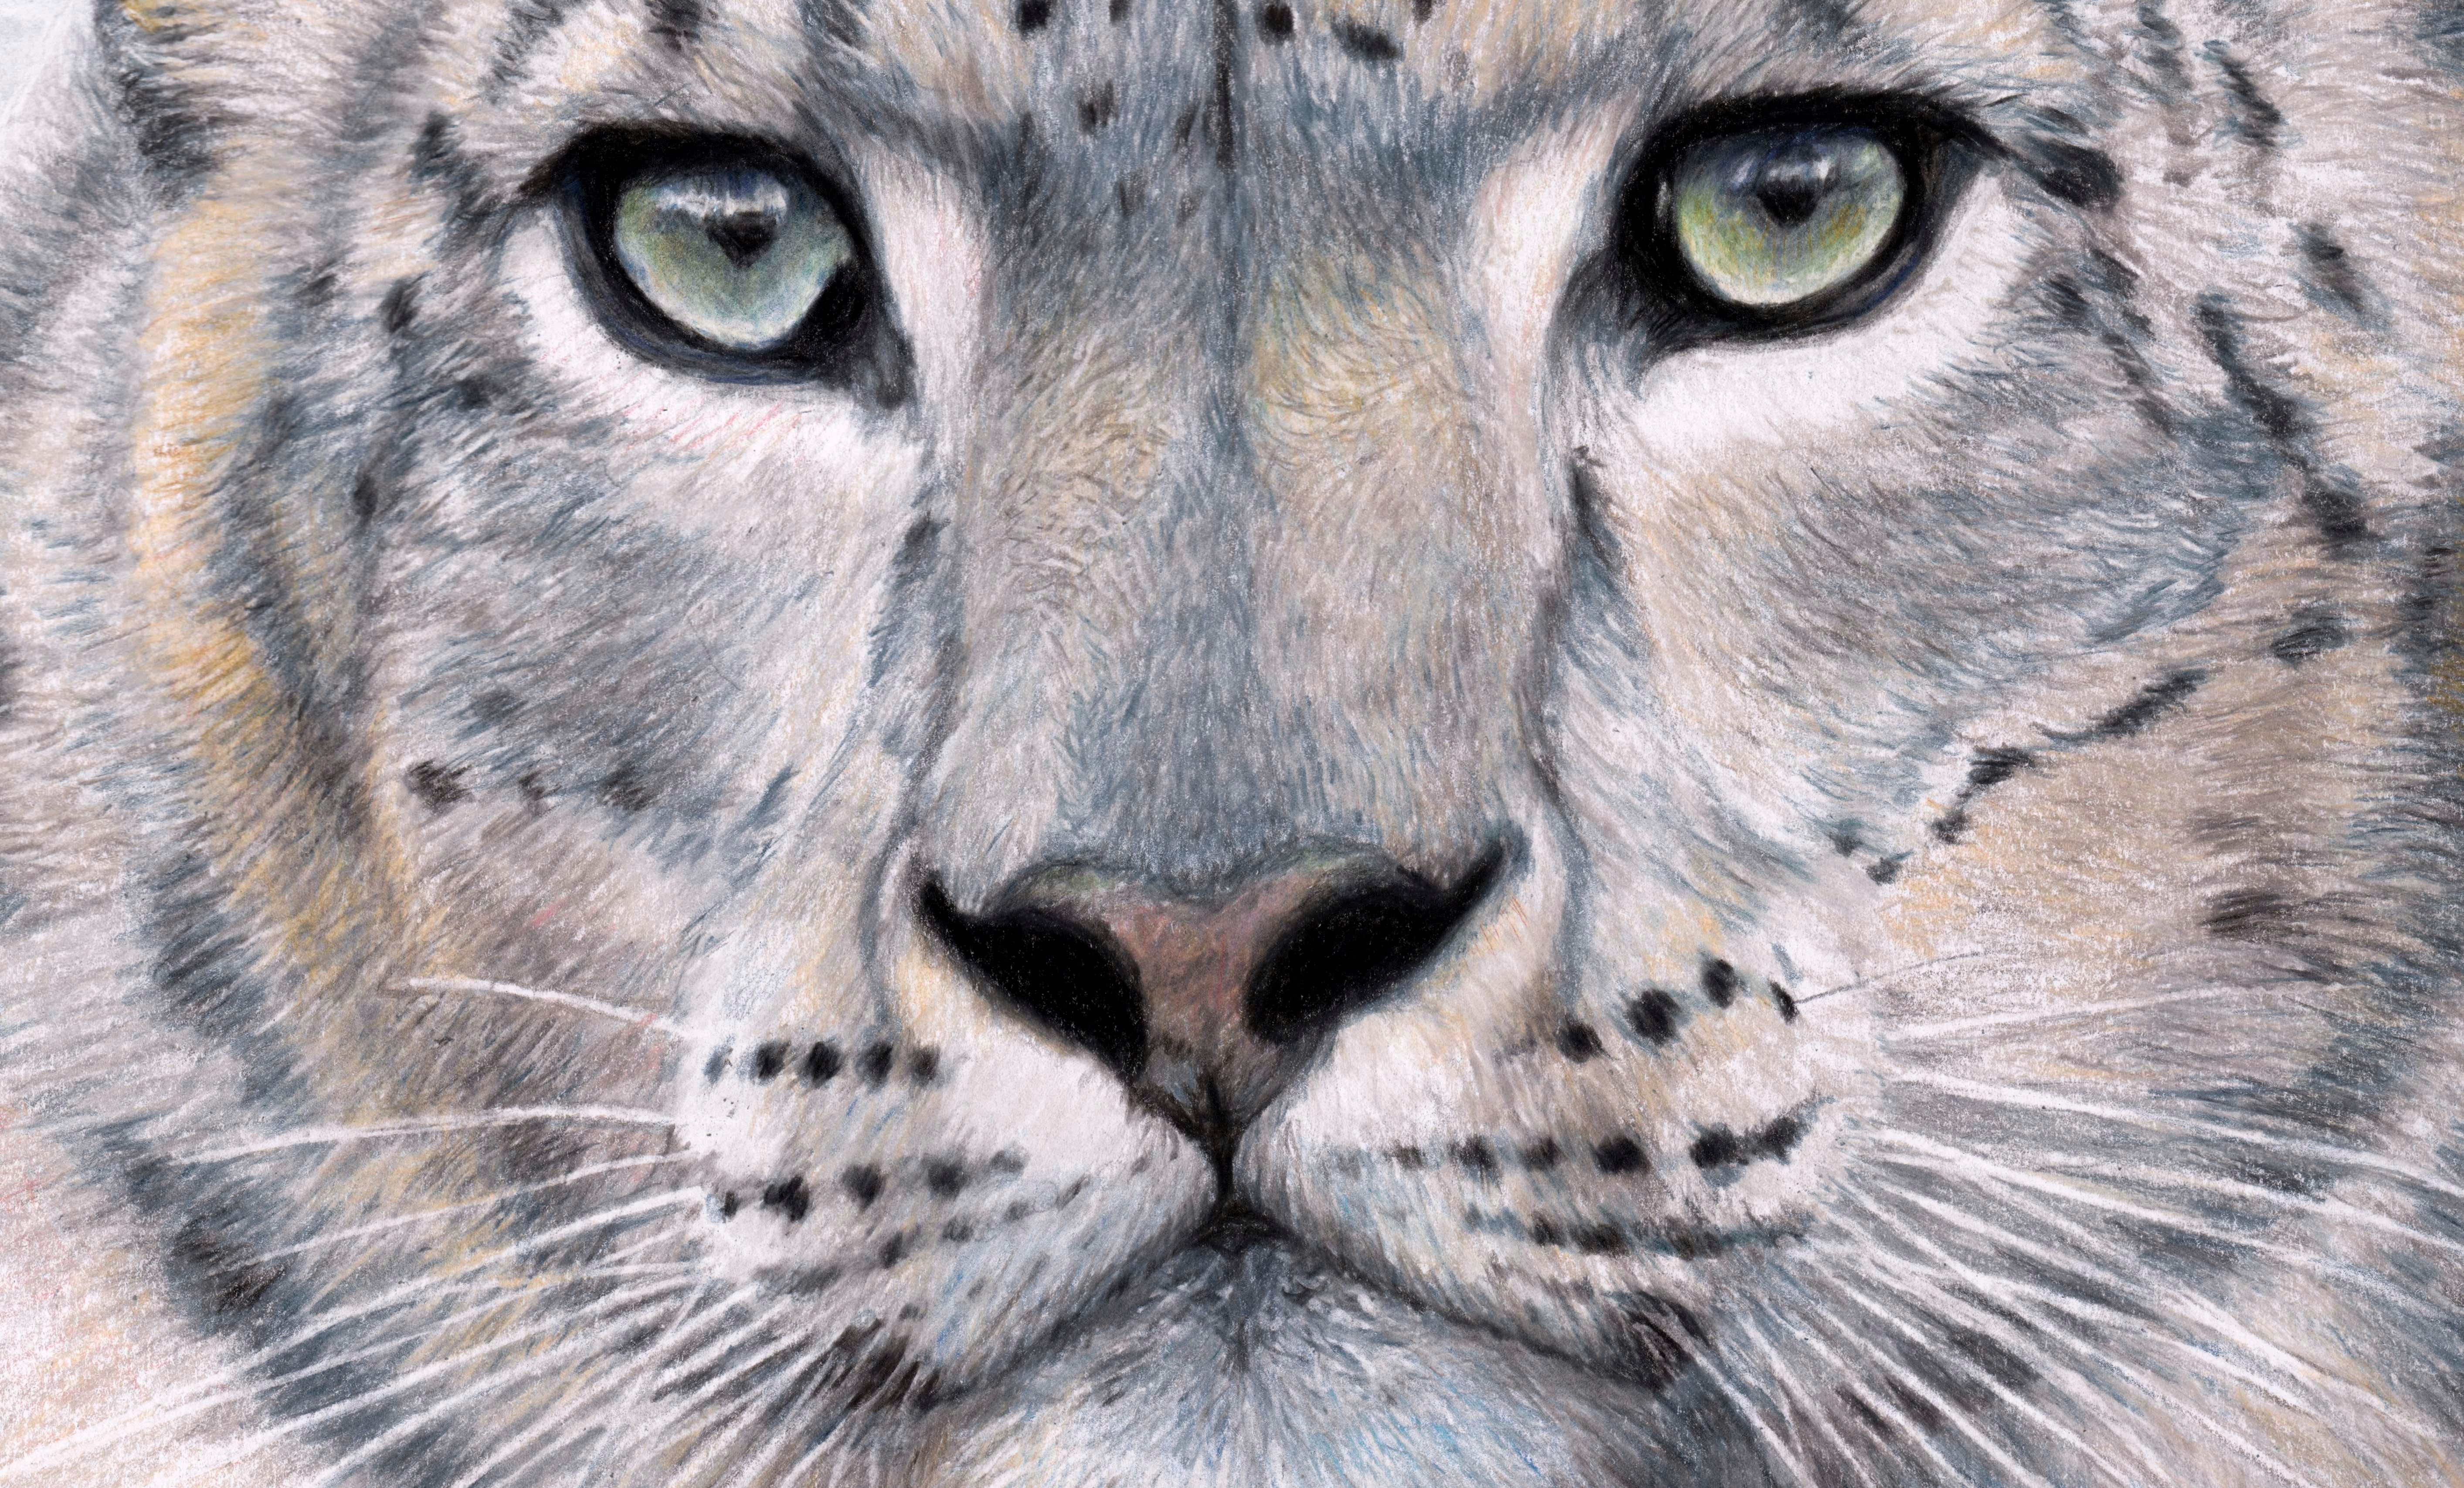 Charlotte Williams (British, b.1970)
On Silent Paw
58.4 x 8.5cm
Polychromos Pencil on Paper

Charlotte Williams is a highly respected and increasingly celebrated British fine artist with a particular interest in wildlife. Remarkably, she is entirely